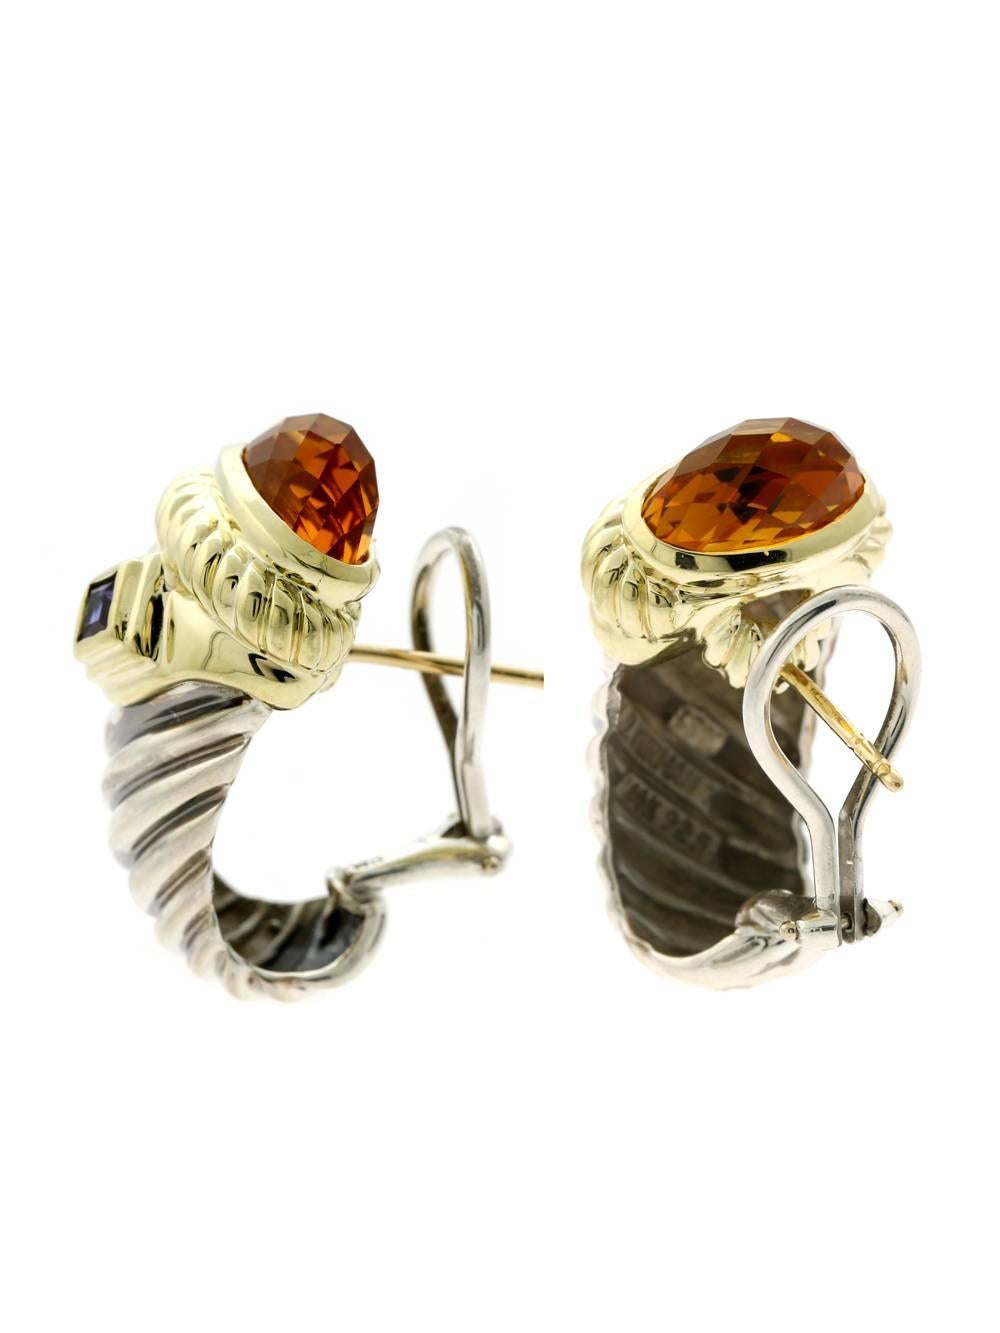 A fabulous pair of David Yurman earrings featuring yellow gold contrasting with silver. The earrings have a faceted Citrine at the top followed by a square step cut Iolite.

Inventory ID: 0000368